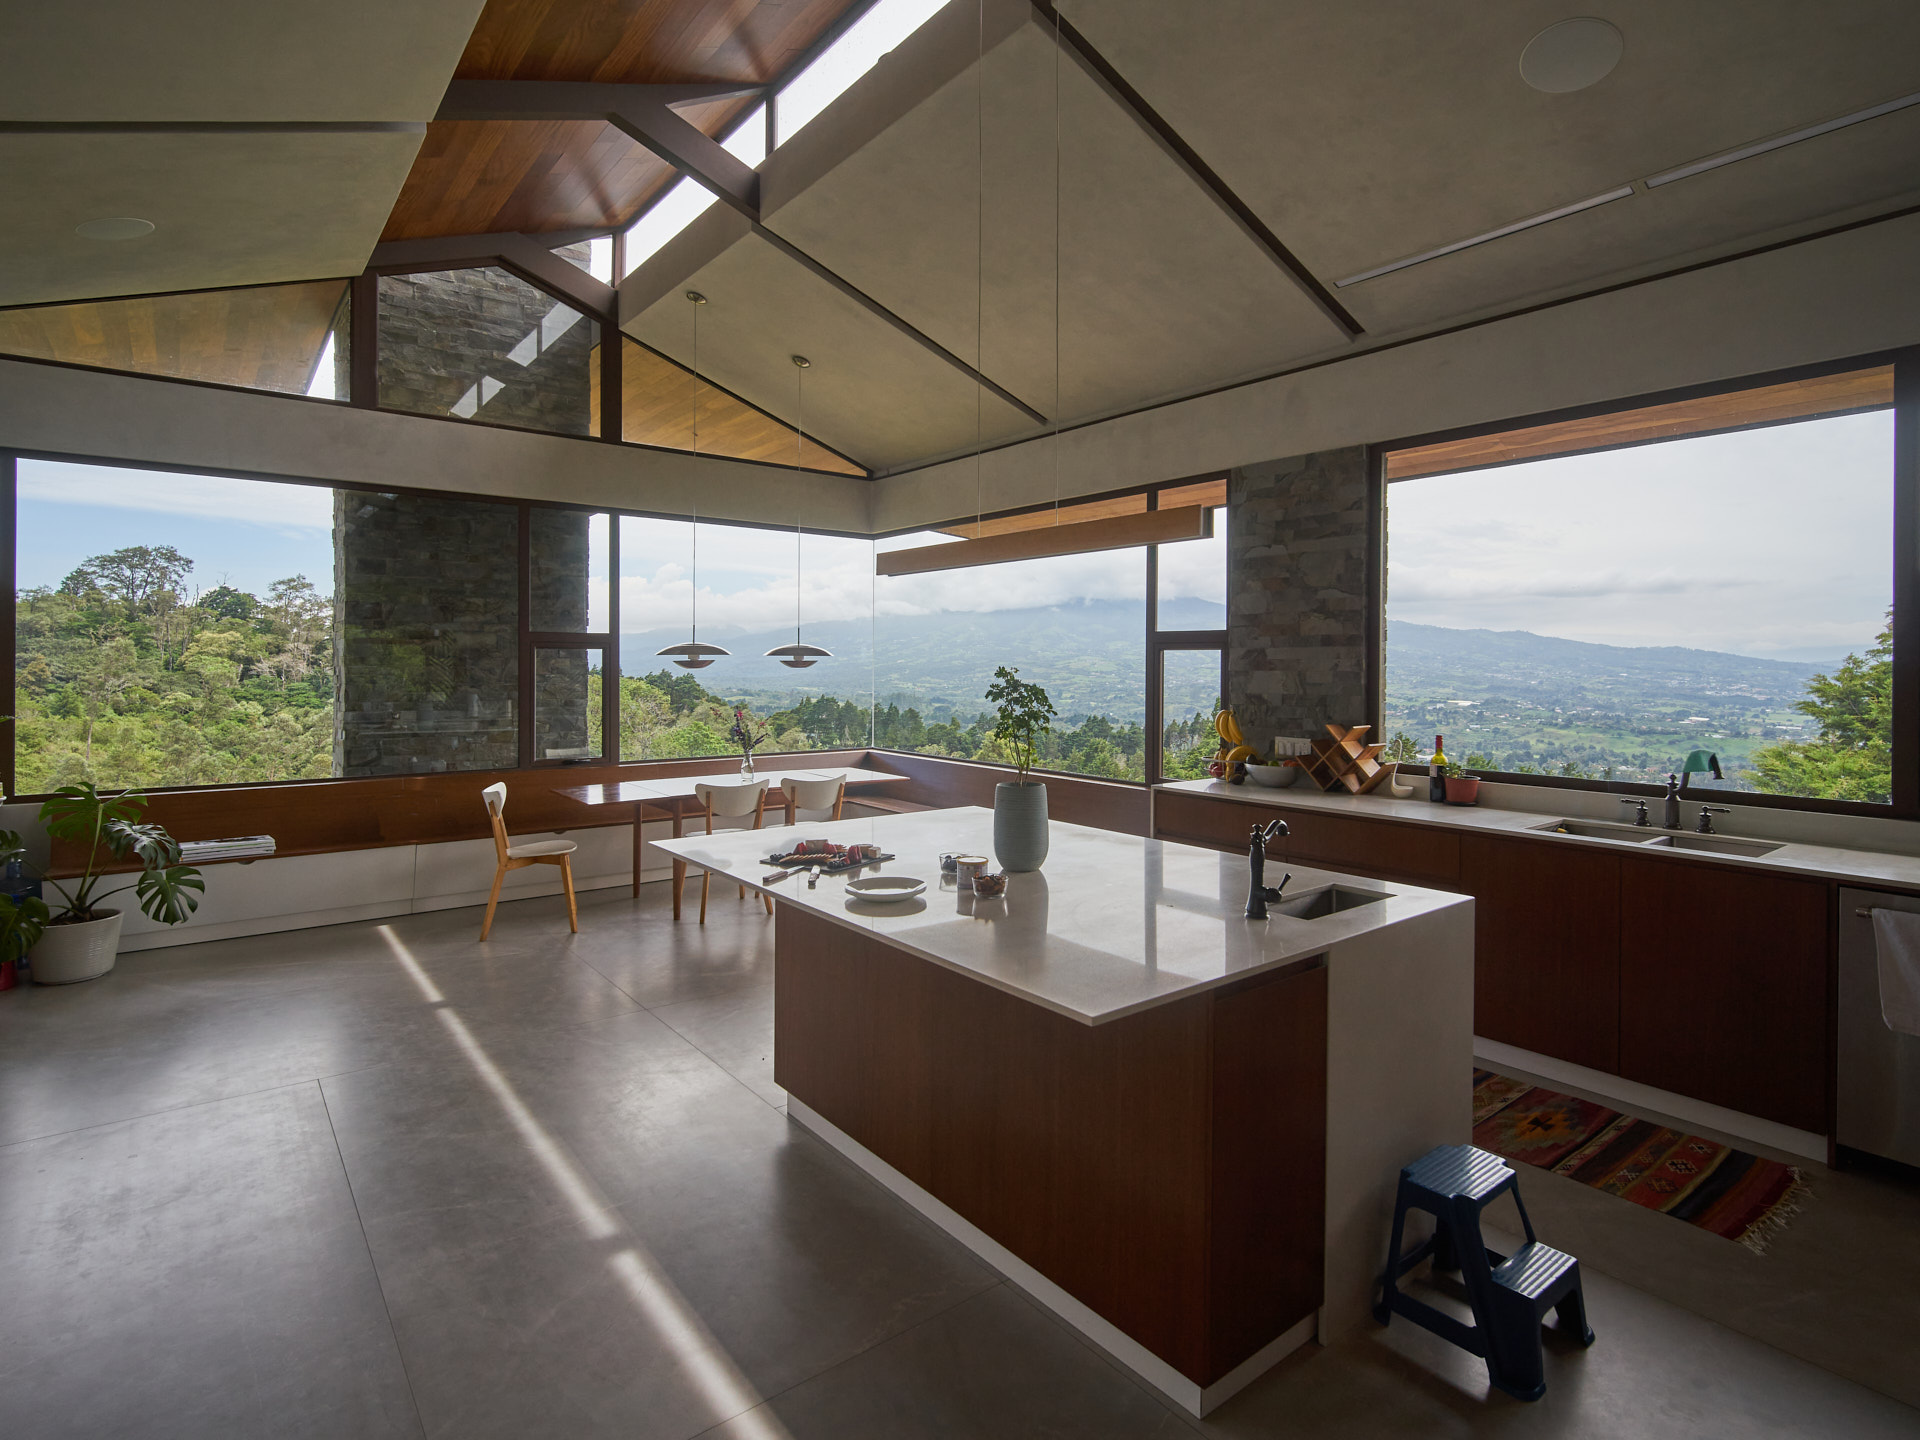 Kitchen at Musdan Estate with a panoramic view of the mountains and volcano.